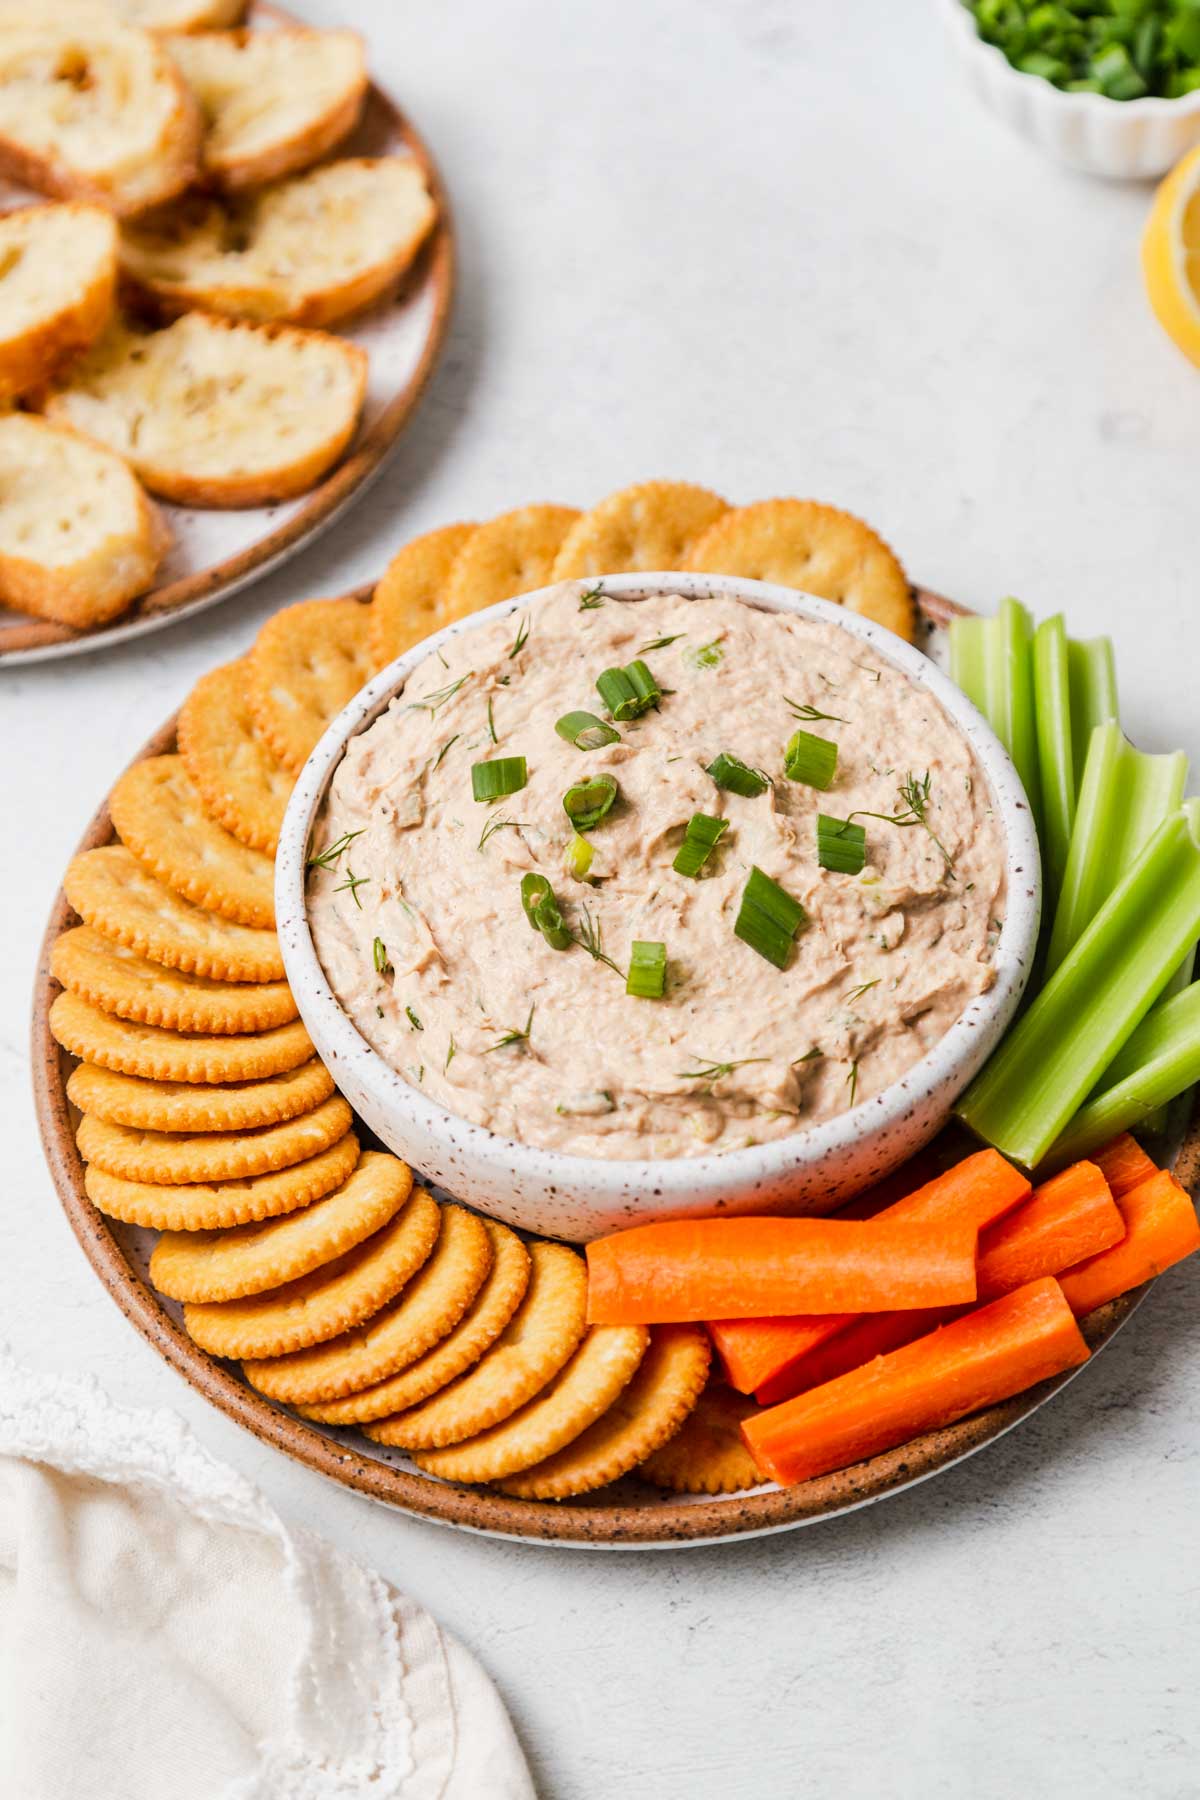 tuna dip with crackers and vegetables.